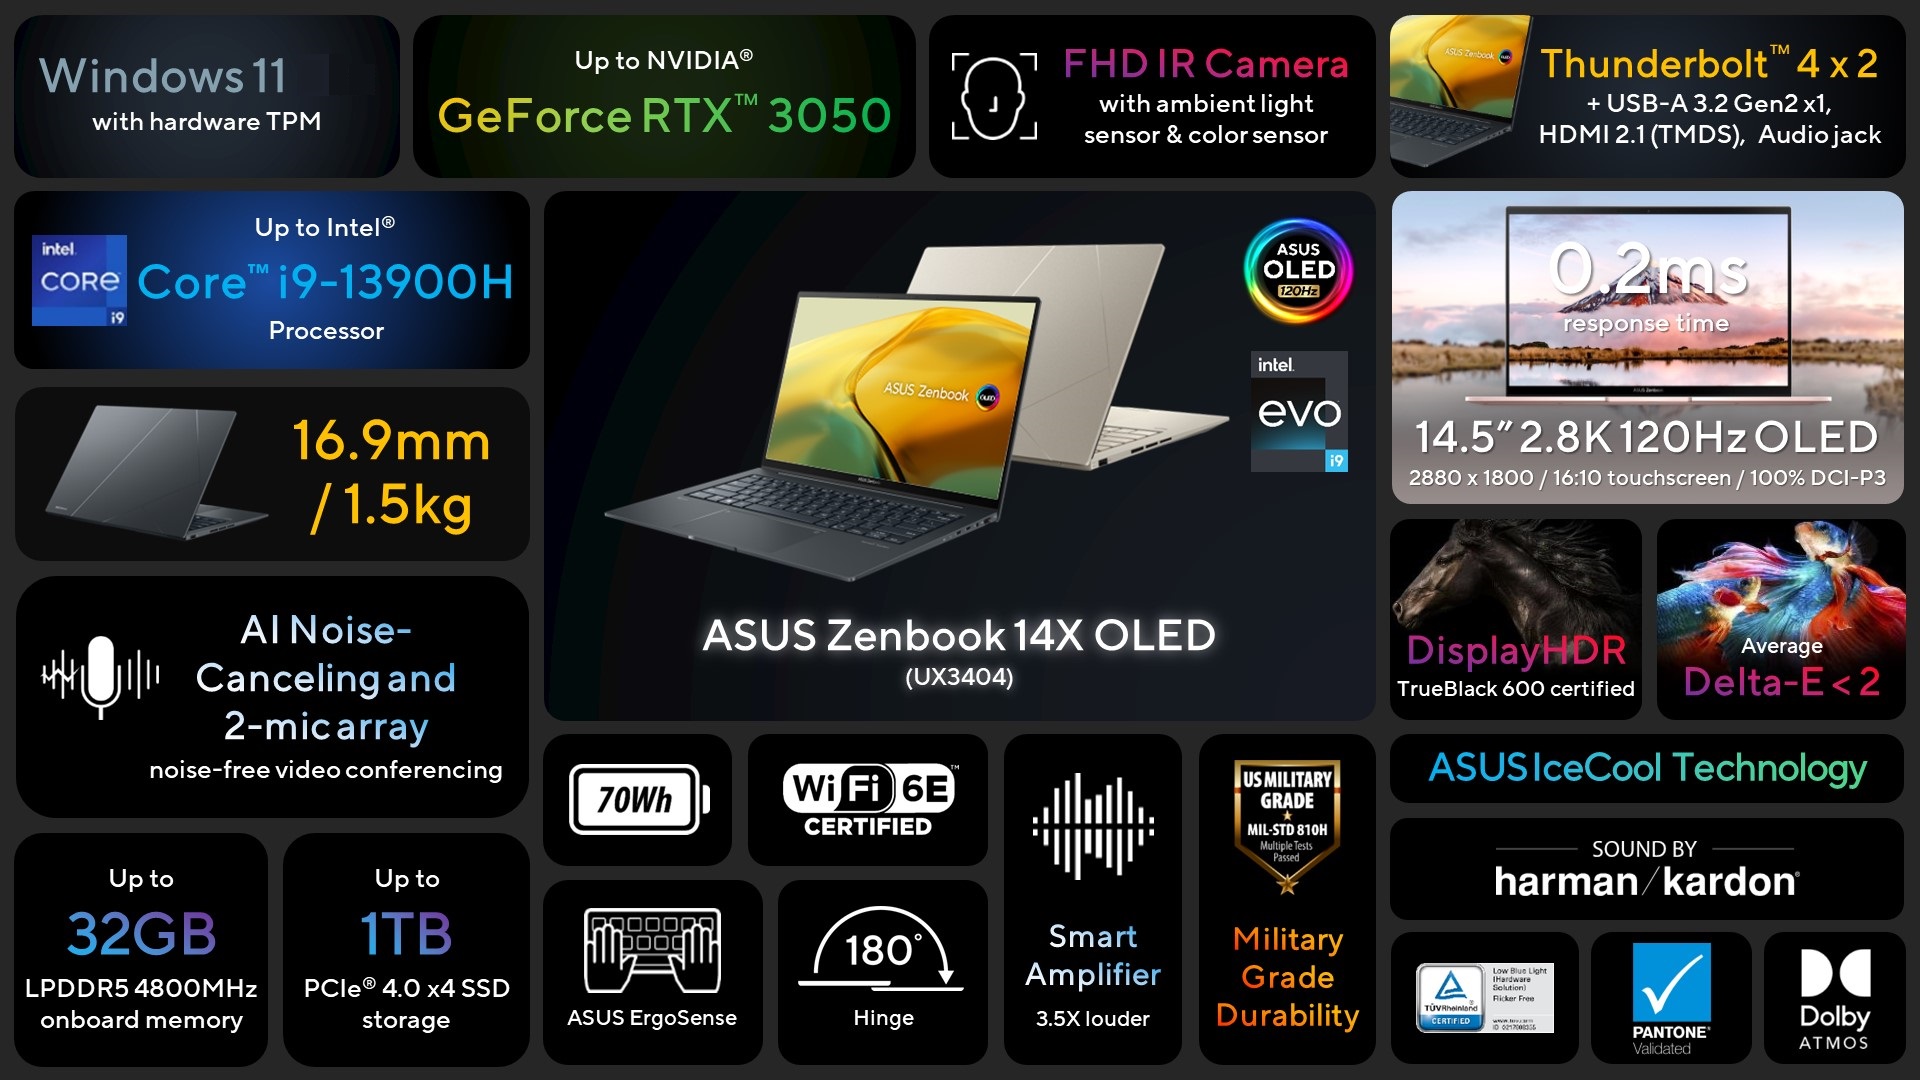 Asus Zenbook 14X OLED (UX3404) - key features